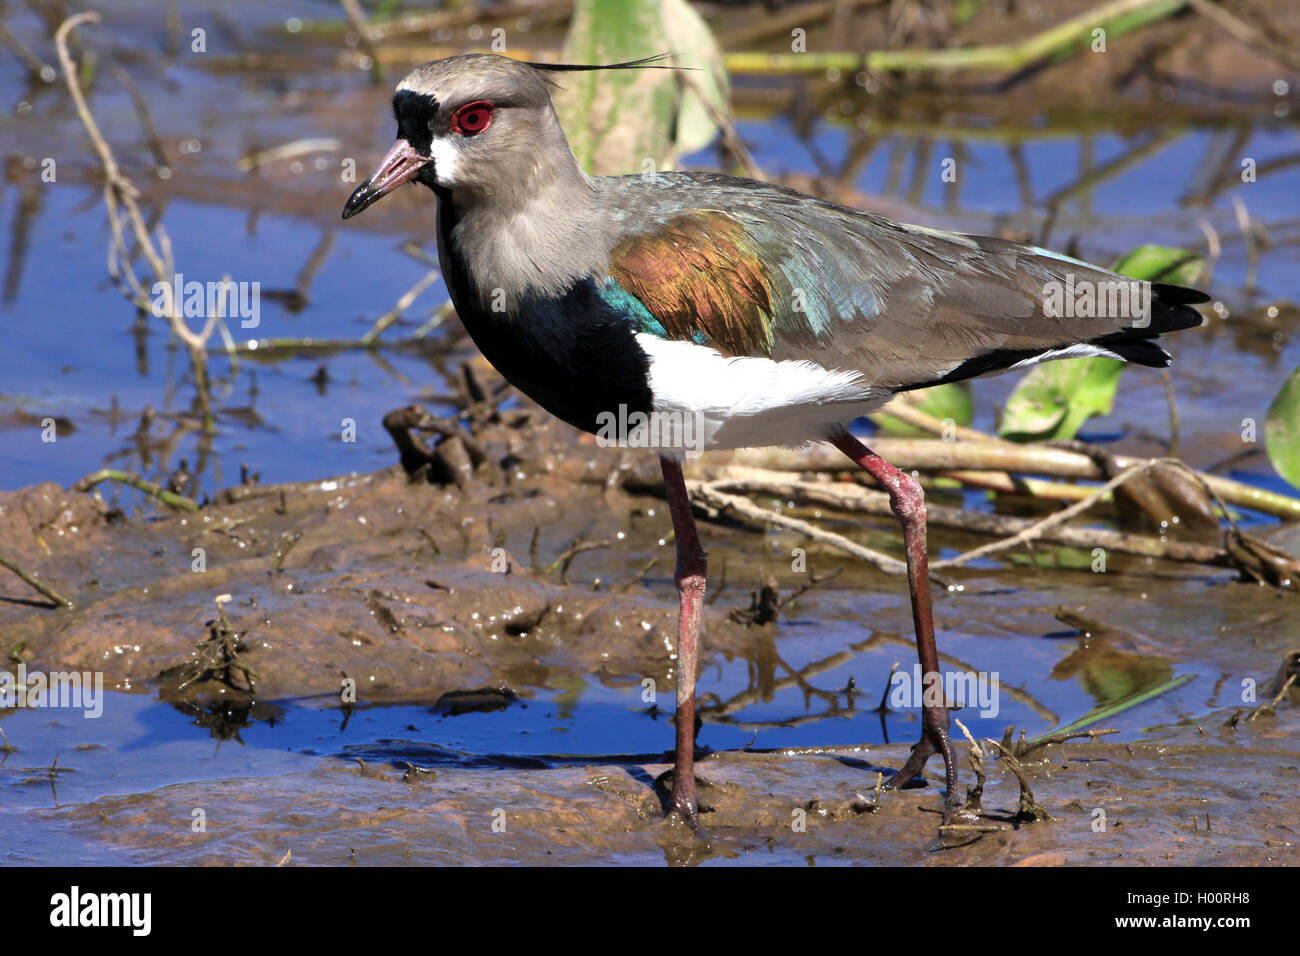 southern lapwing (Vanellus chilensis), in shallow water, Costa Rica Stock Photo